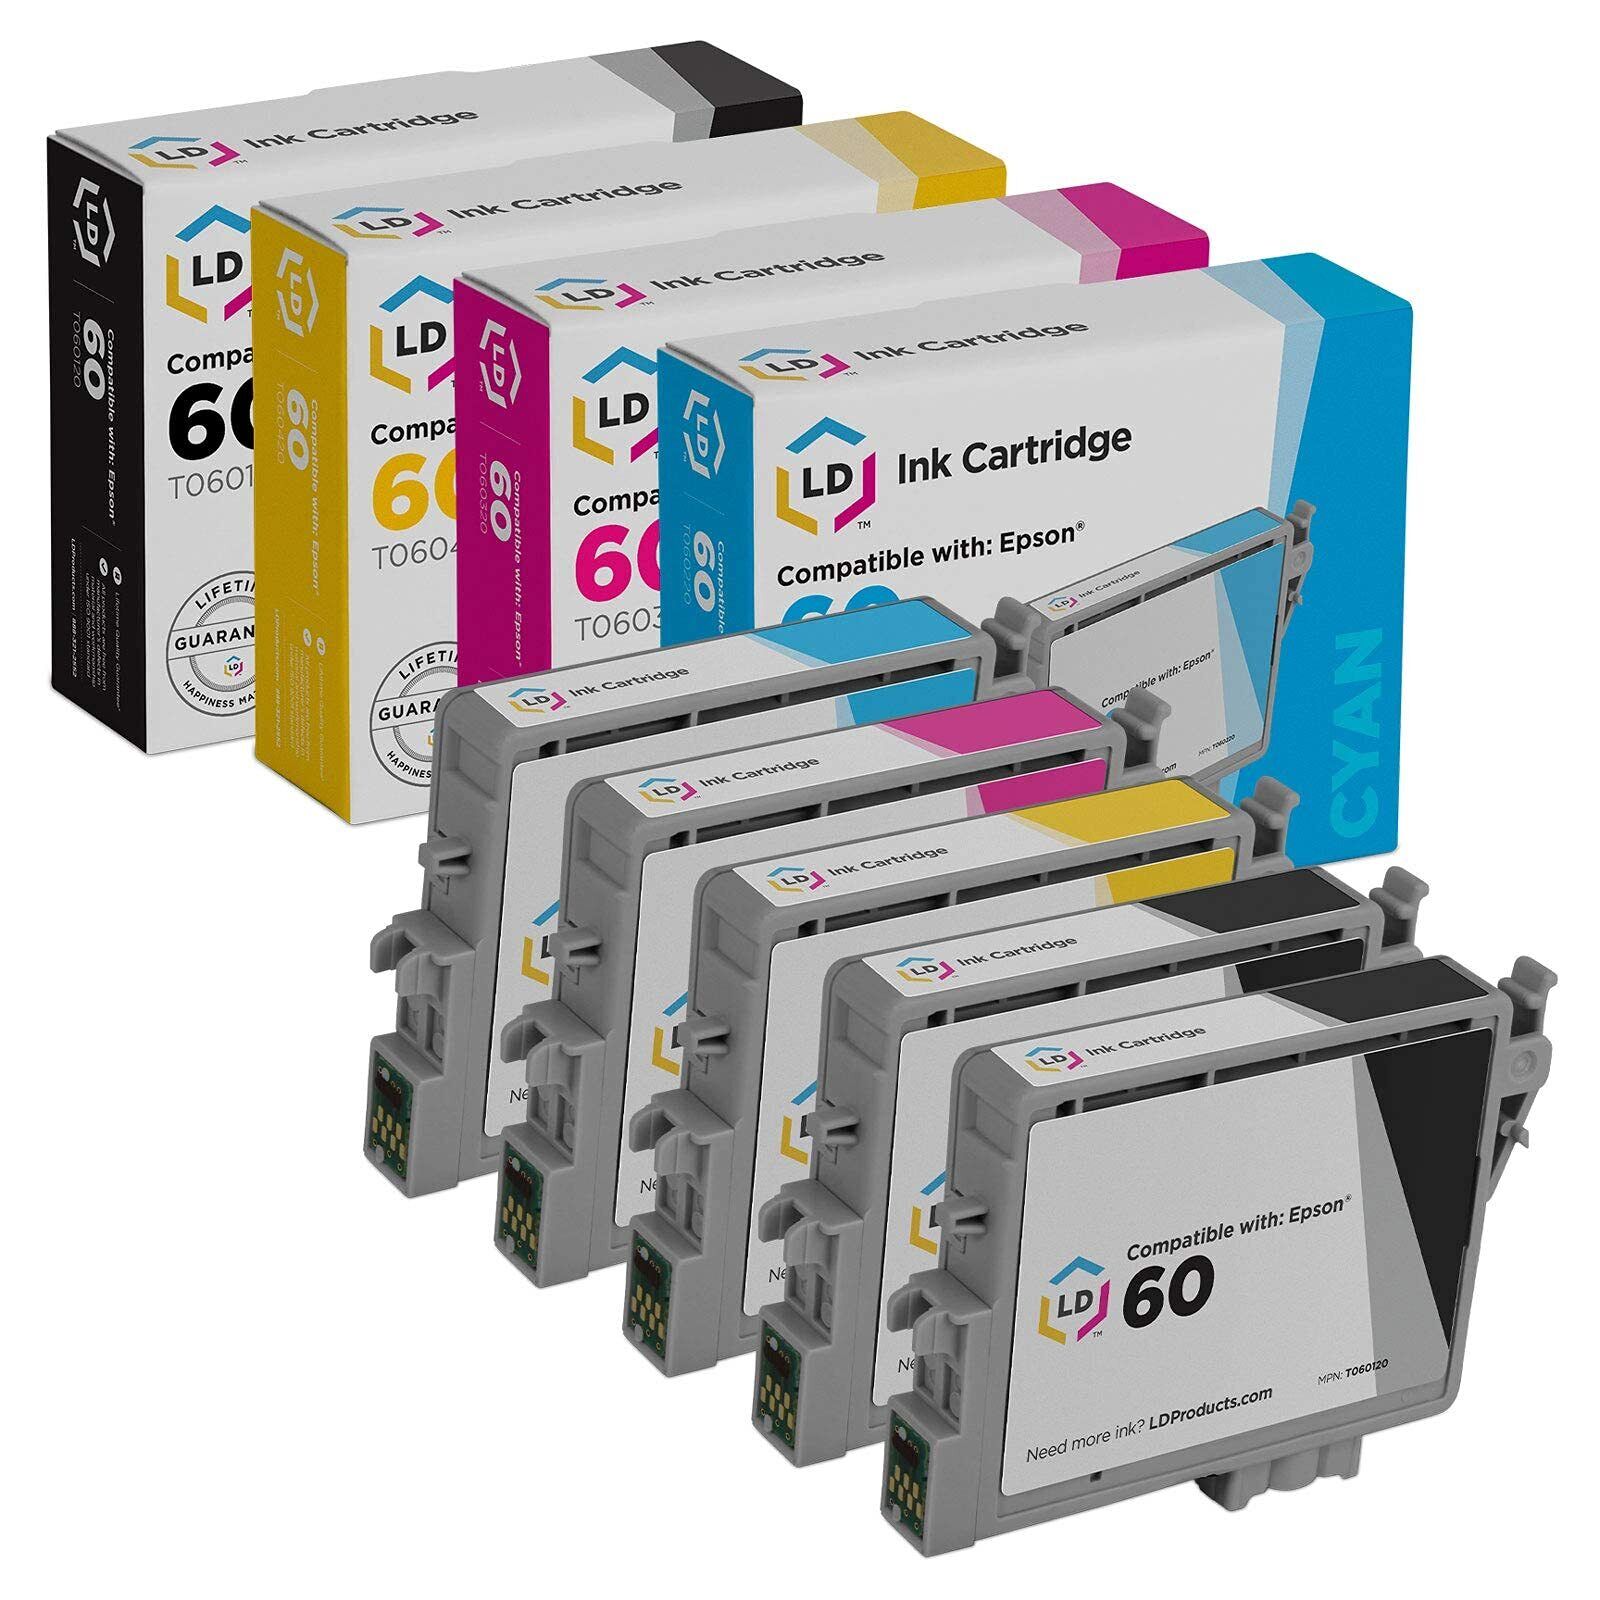 Reman Ink Replacement for Epson 60 T060 (2 Blk, 1 C, 1 M, 1 Y, 5-Pk)